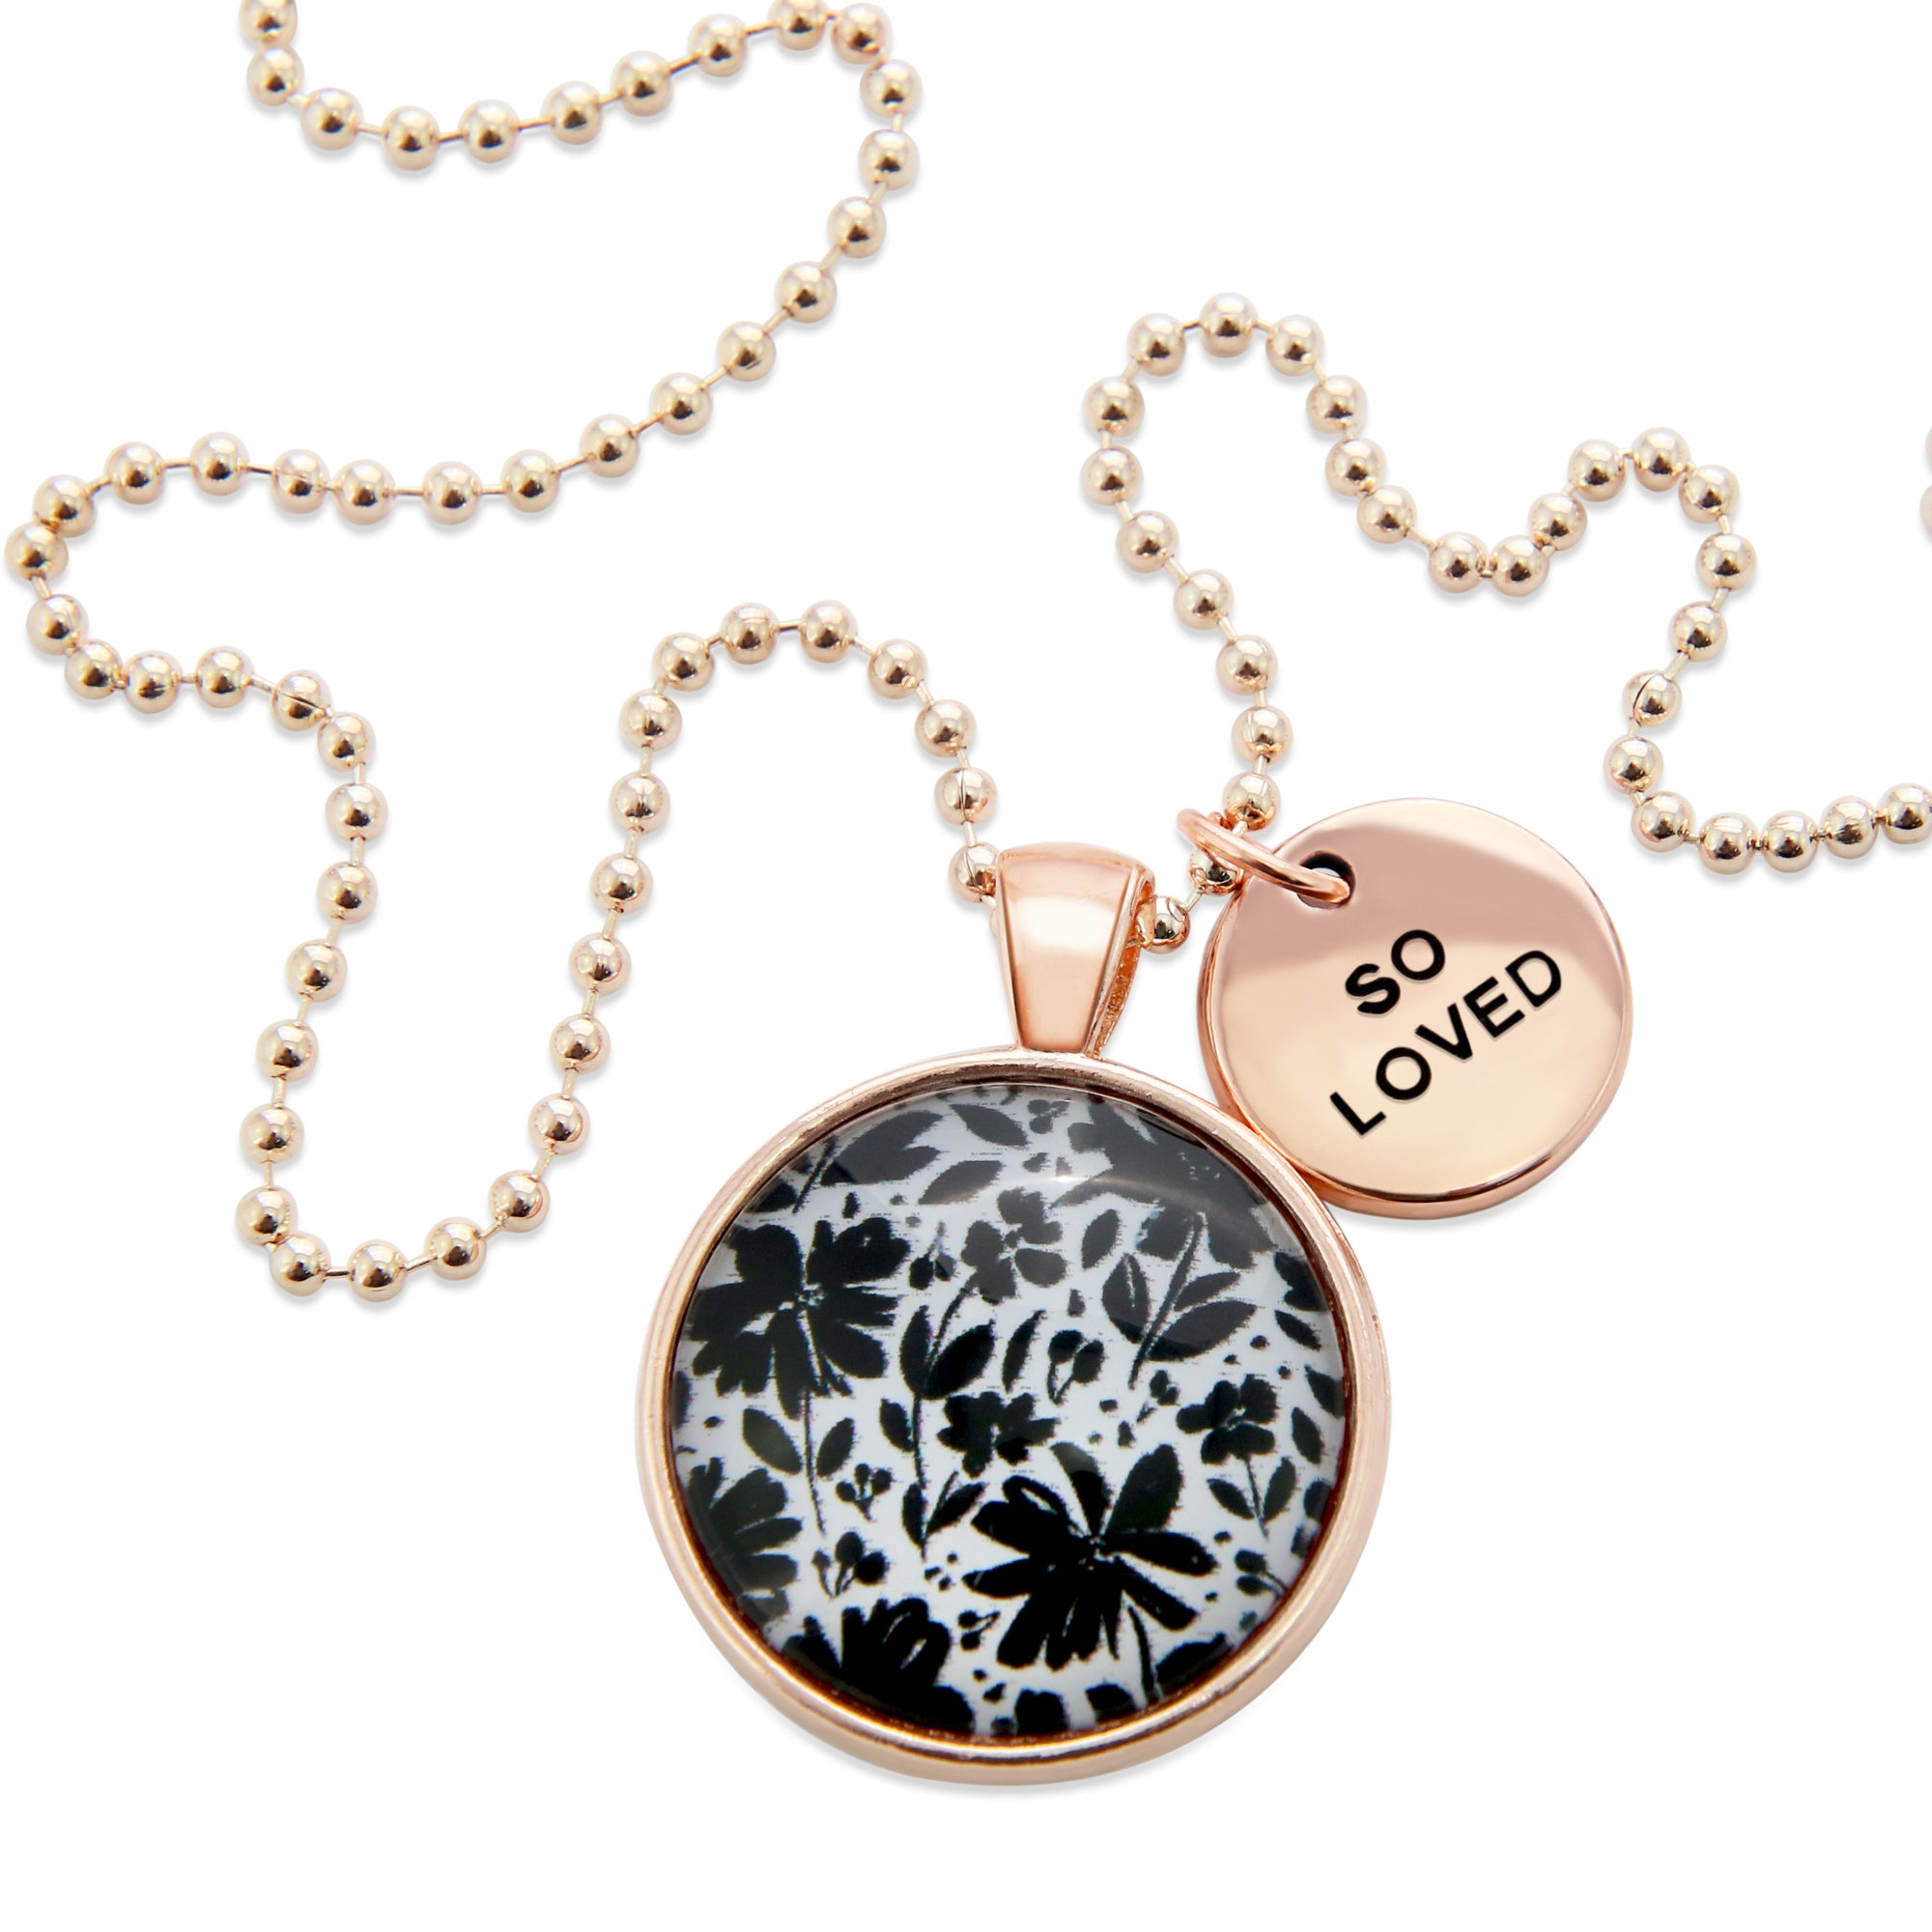 Black & White Collection - Rose Gold 'SO LOVED' Necklace - Inky Buds (10833)